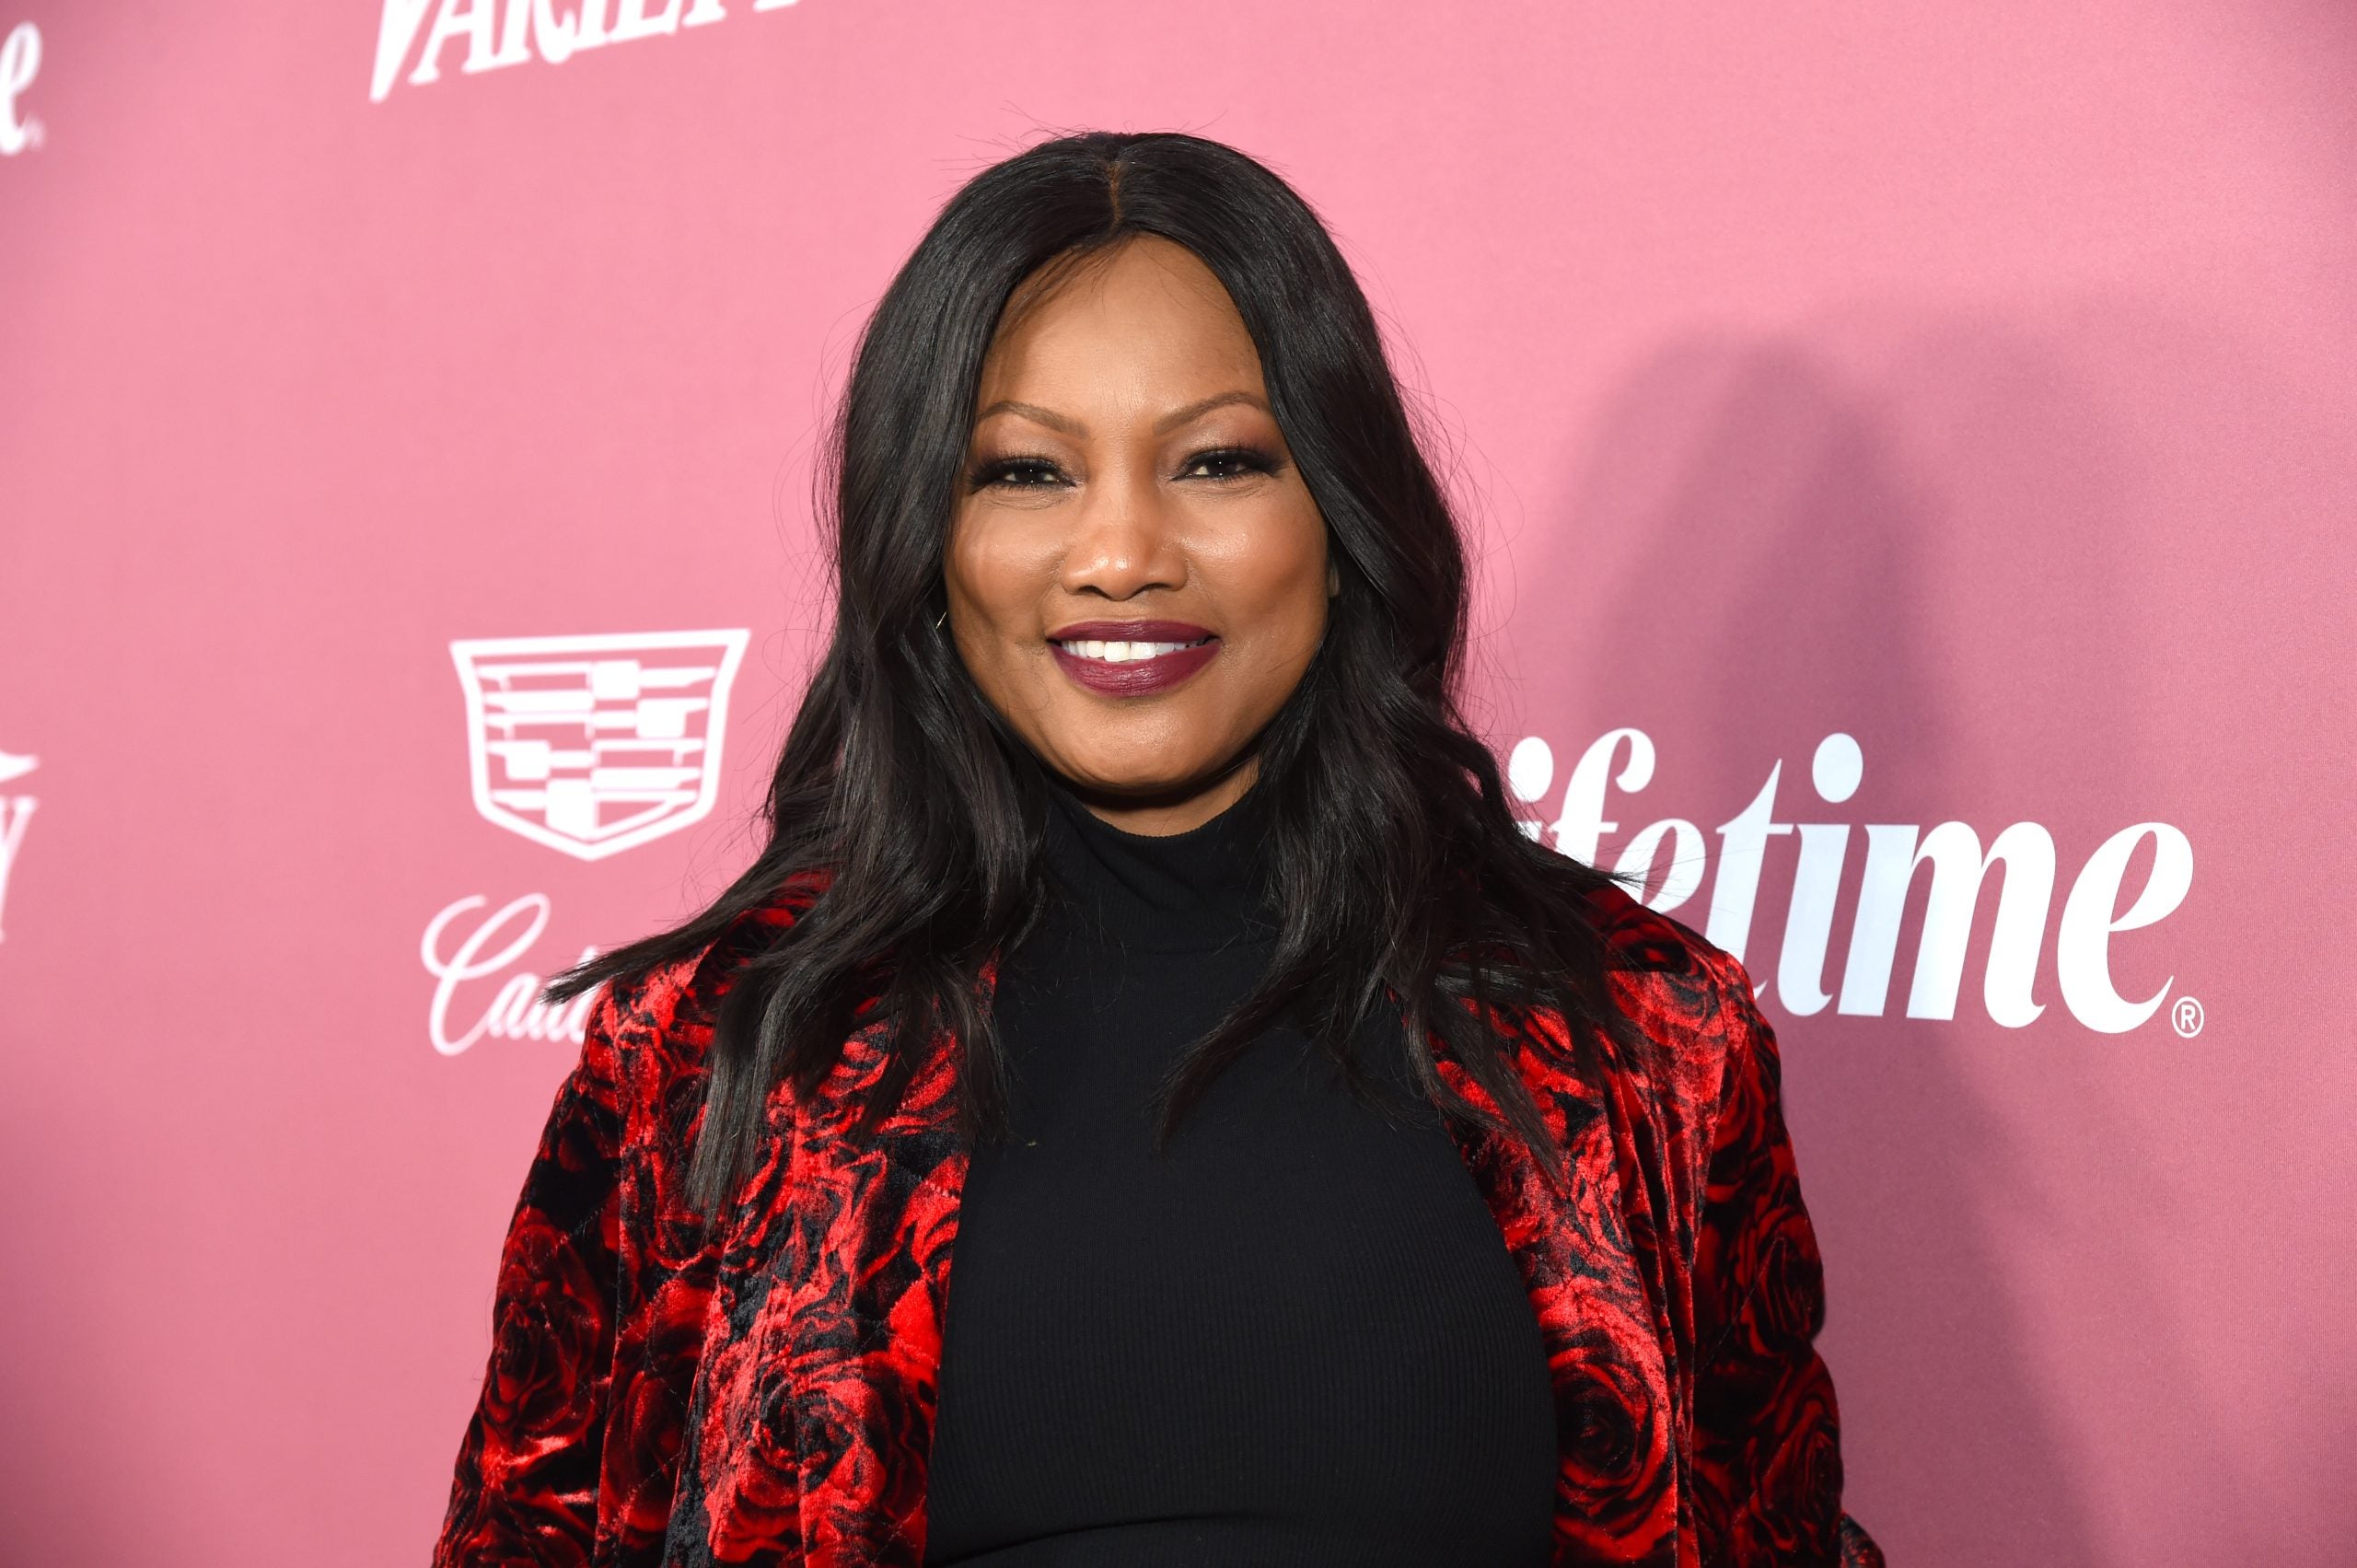 Garcelle Beauvais Opens Up About Past Challenges With Fibroids and Infertility In New Book